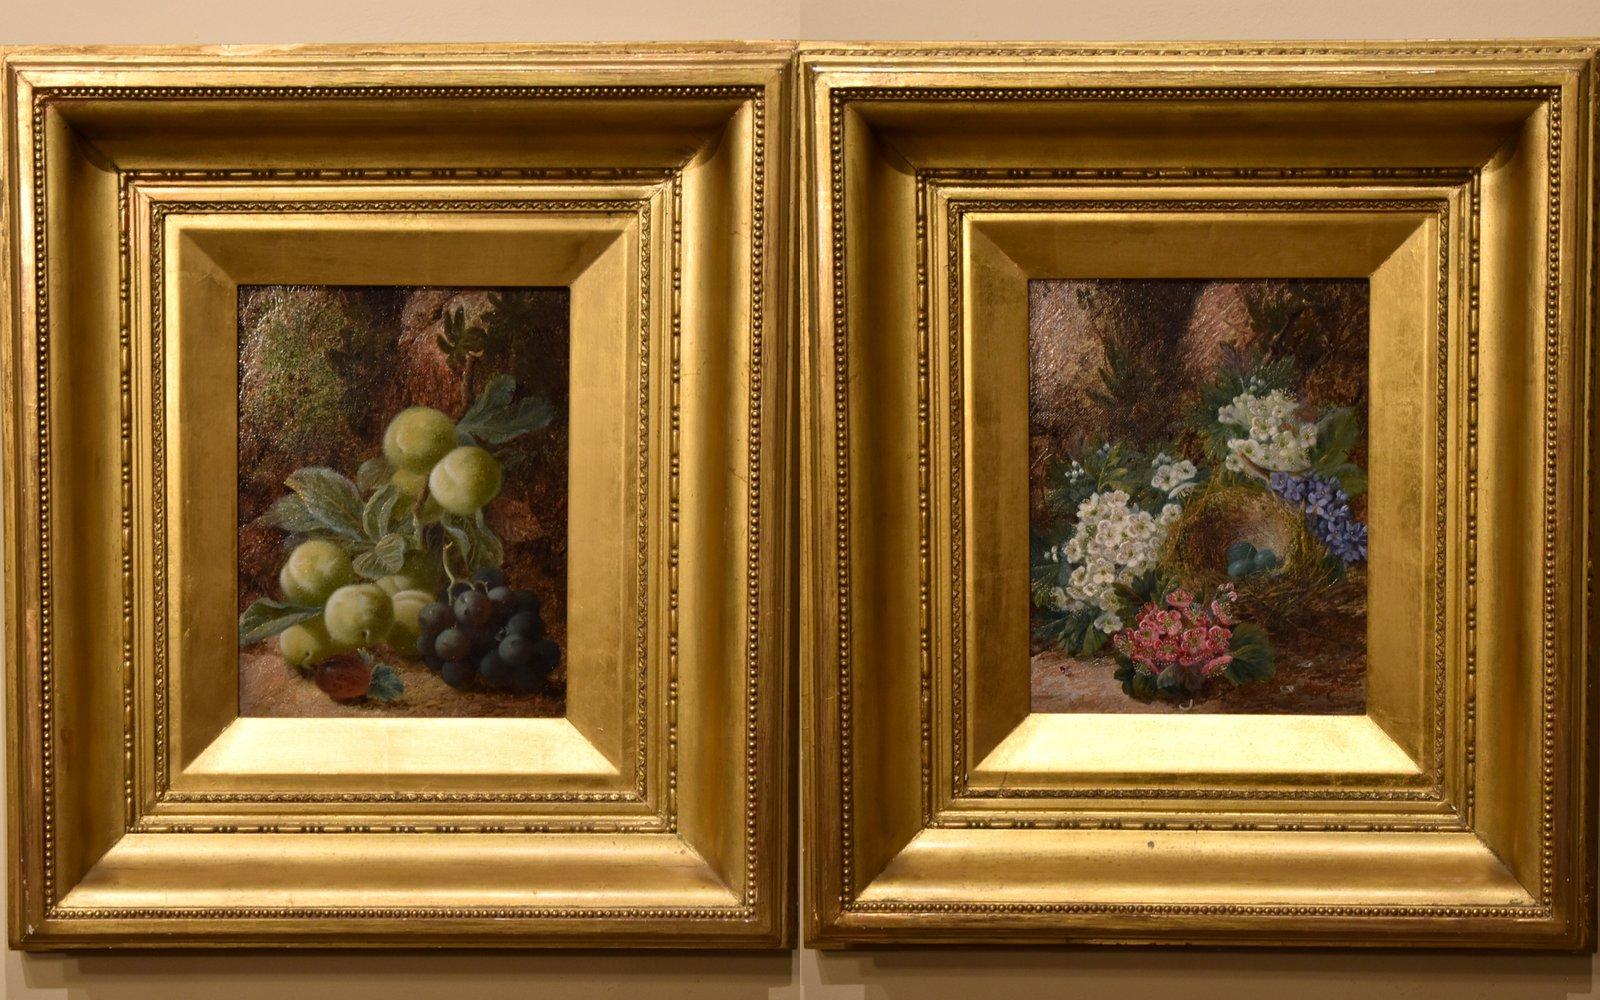 George Clare Still-Life Painting - Oil paintings pair by Oliver Clare "Fruit" and "Flowers" 